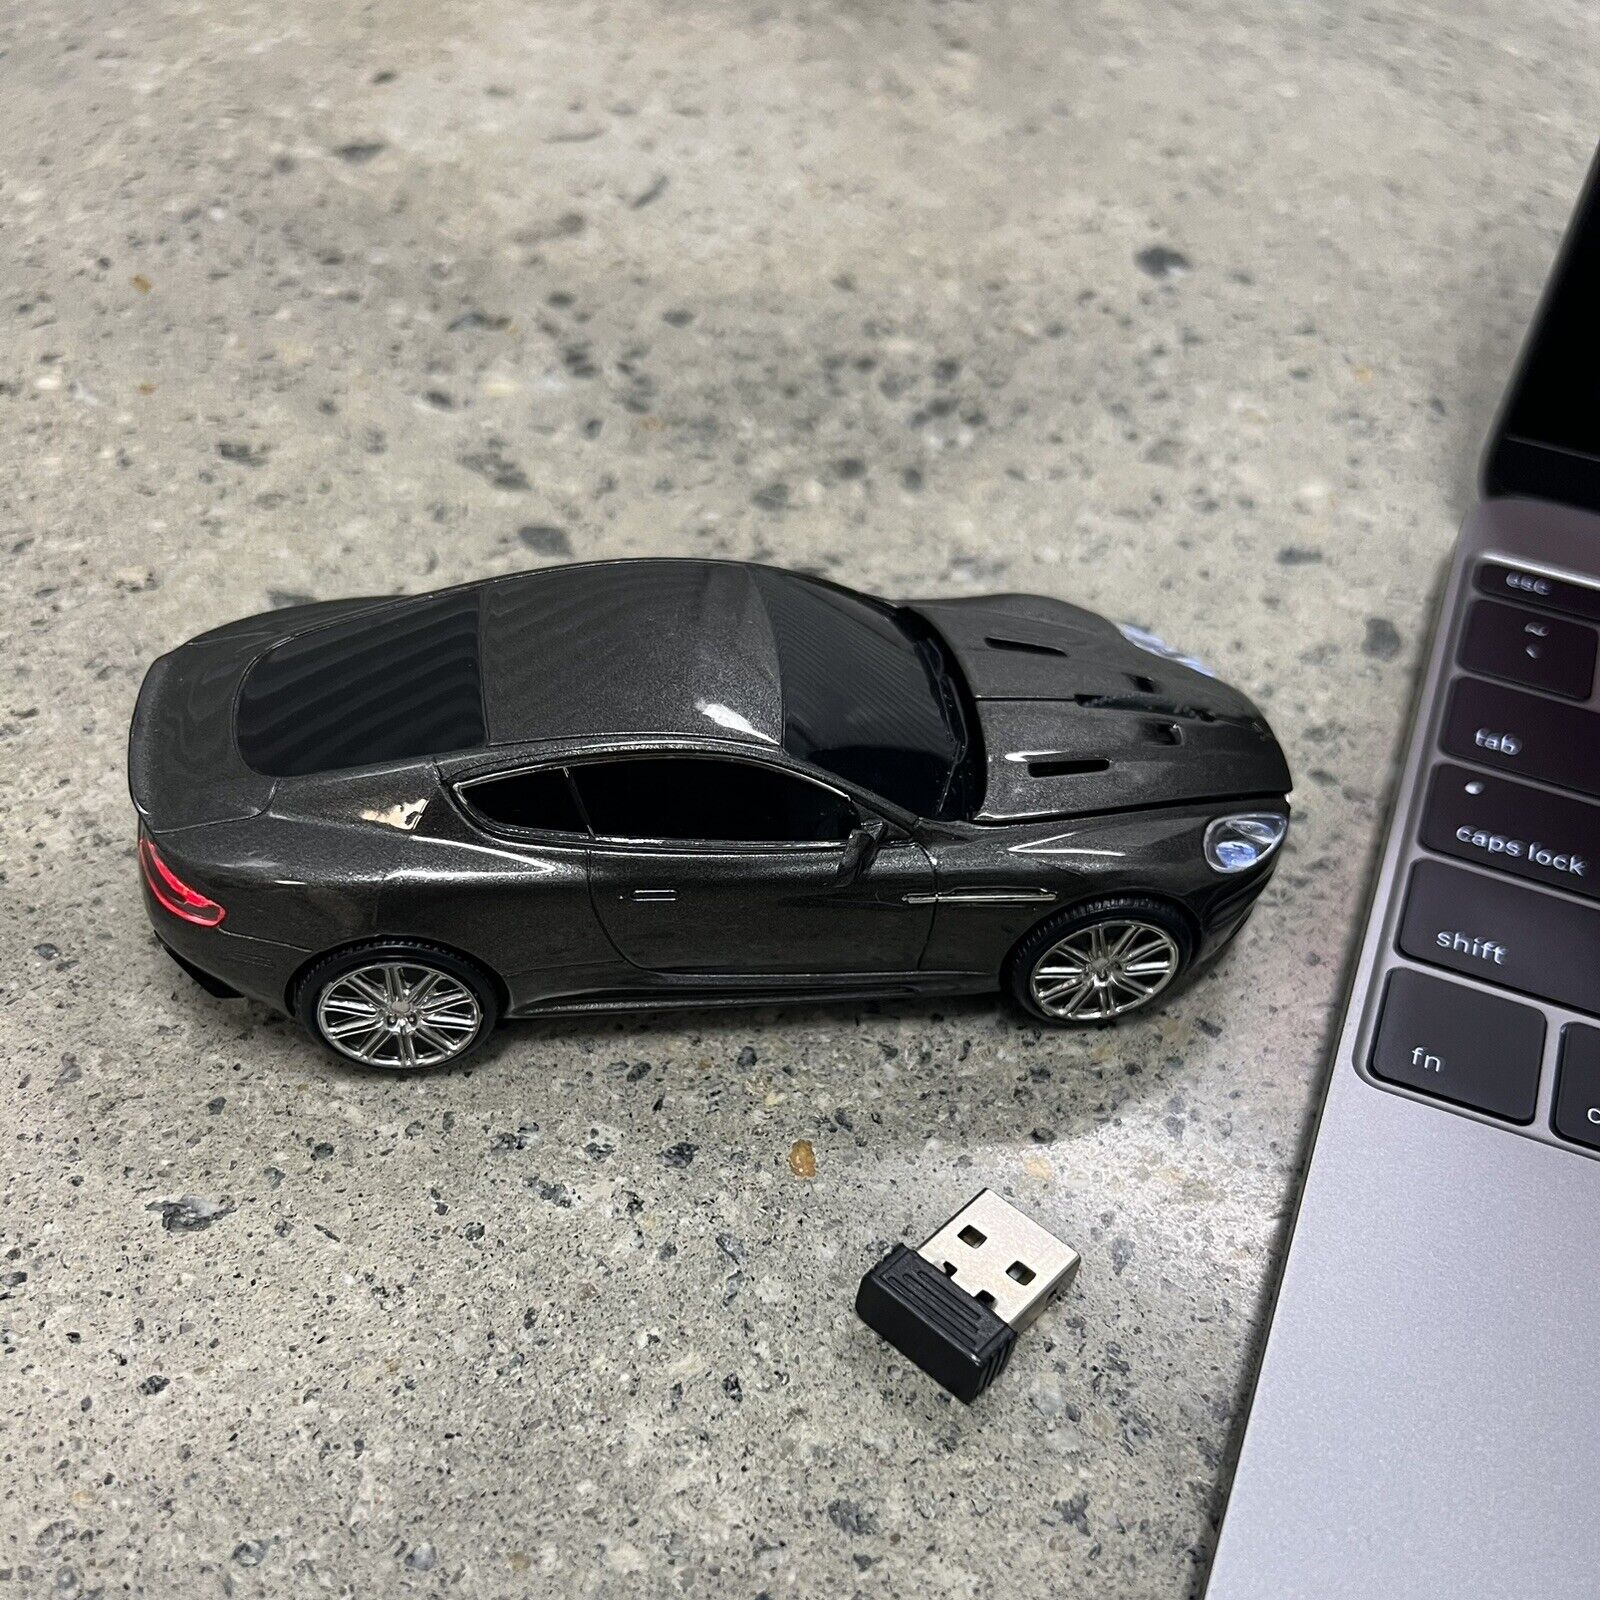 Official ASTON MARTIN DBS Wireless USB Click Car Mouse - RARE/PREMIUM / MUST SEE